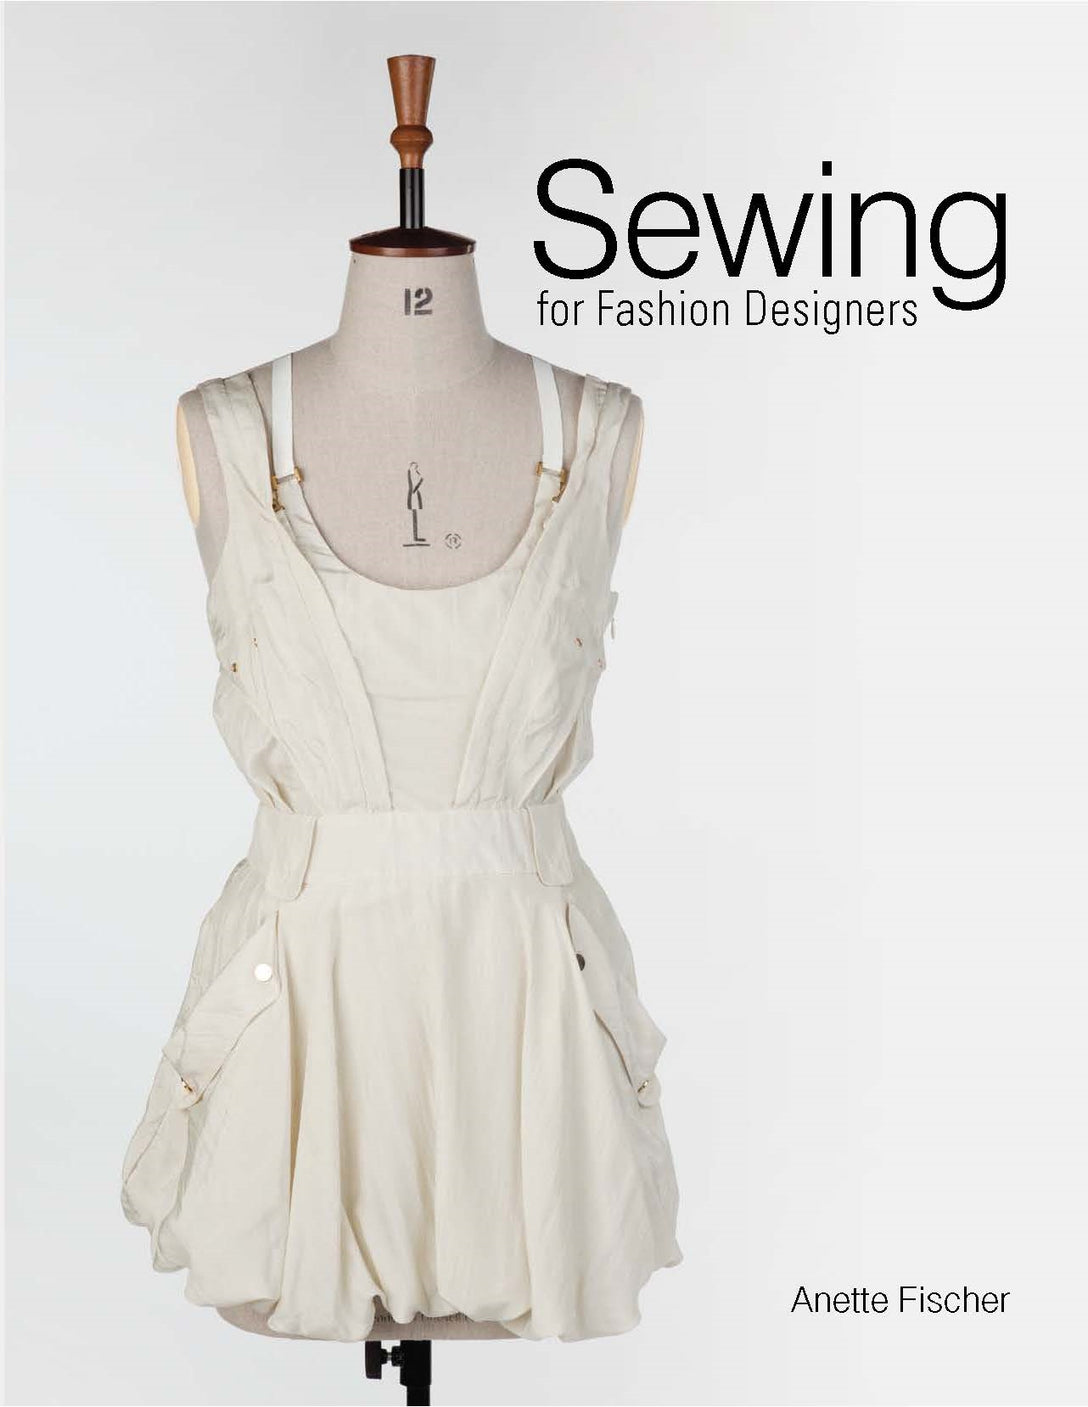 Sewing for Fashion Designers by Anette Fischer